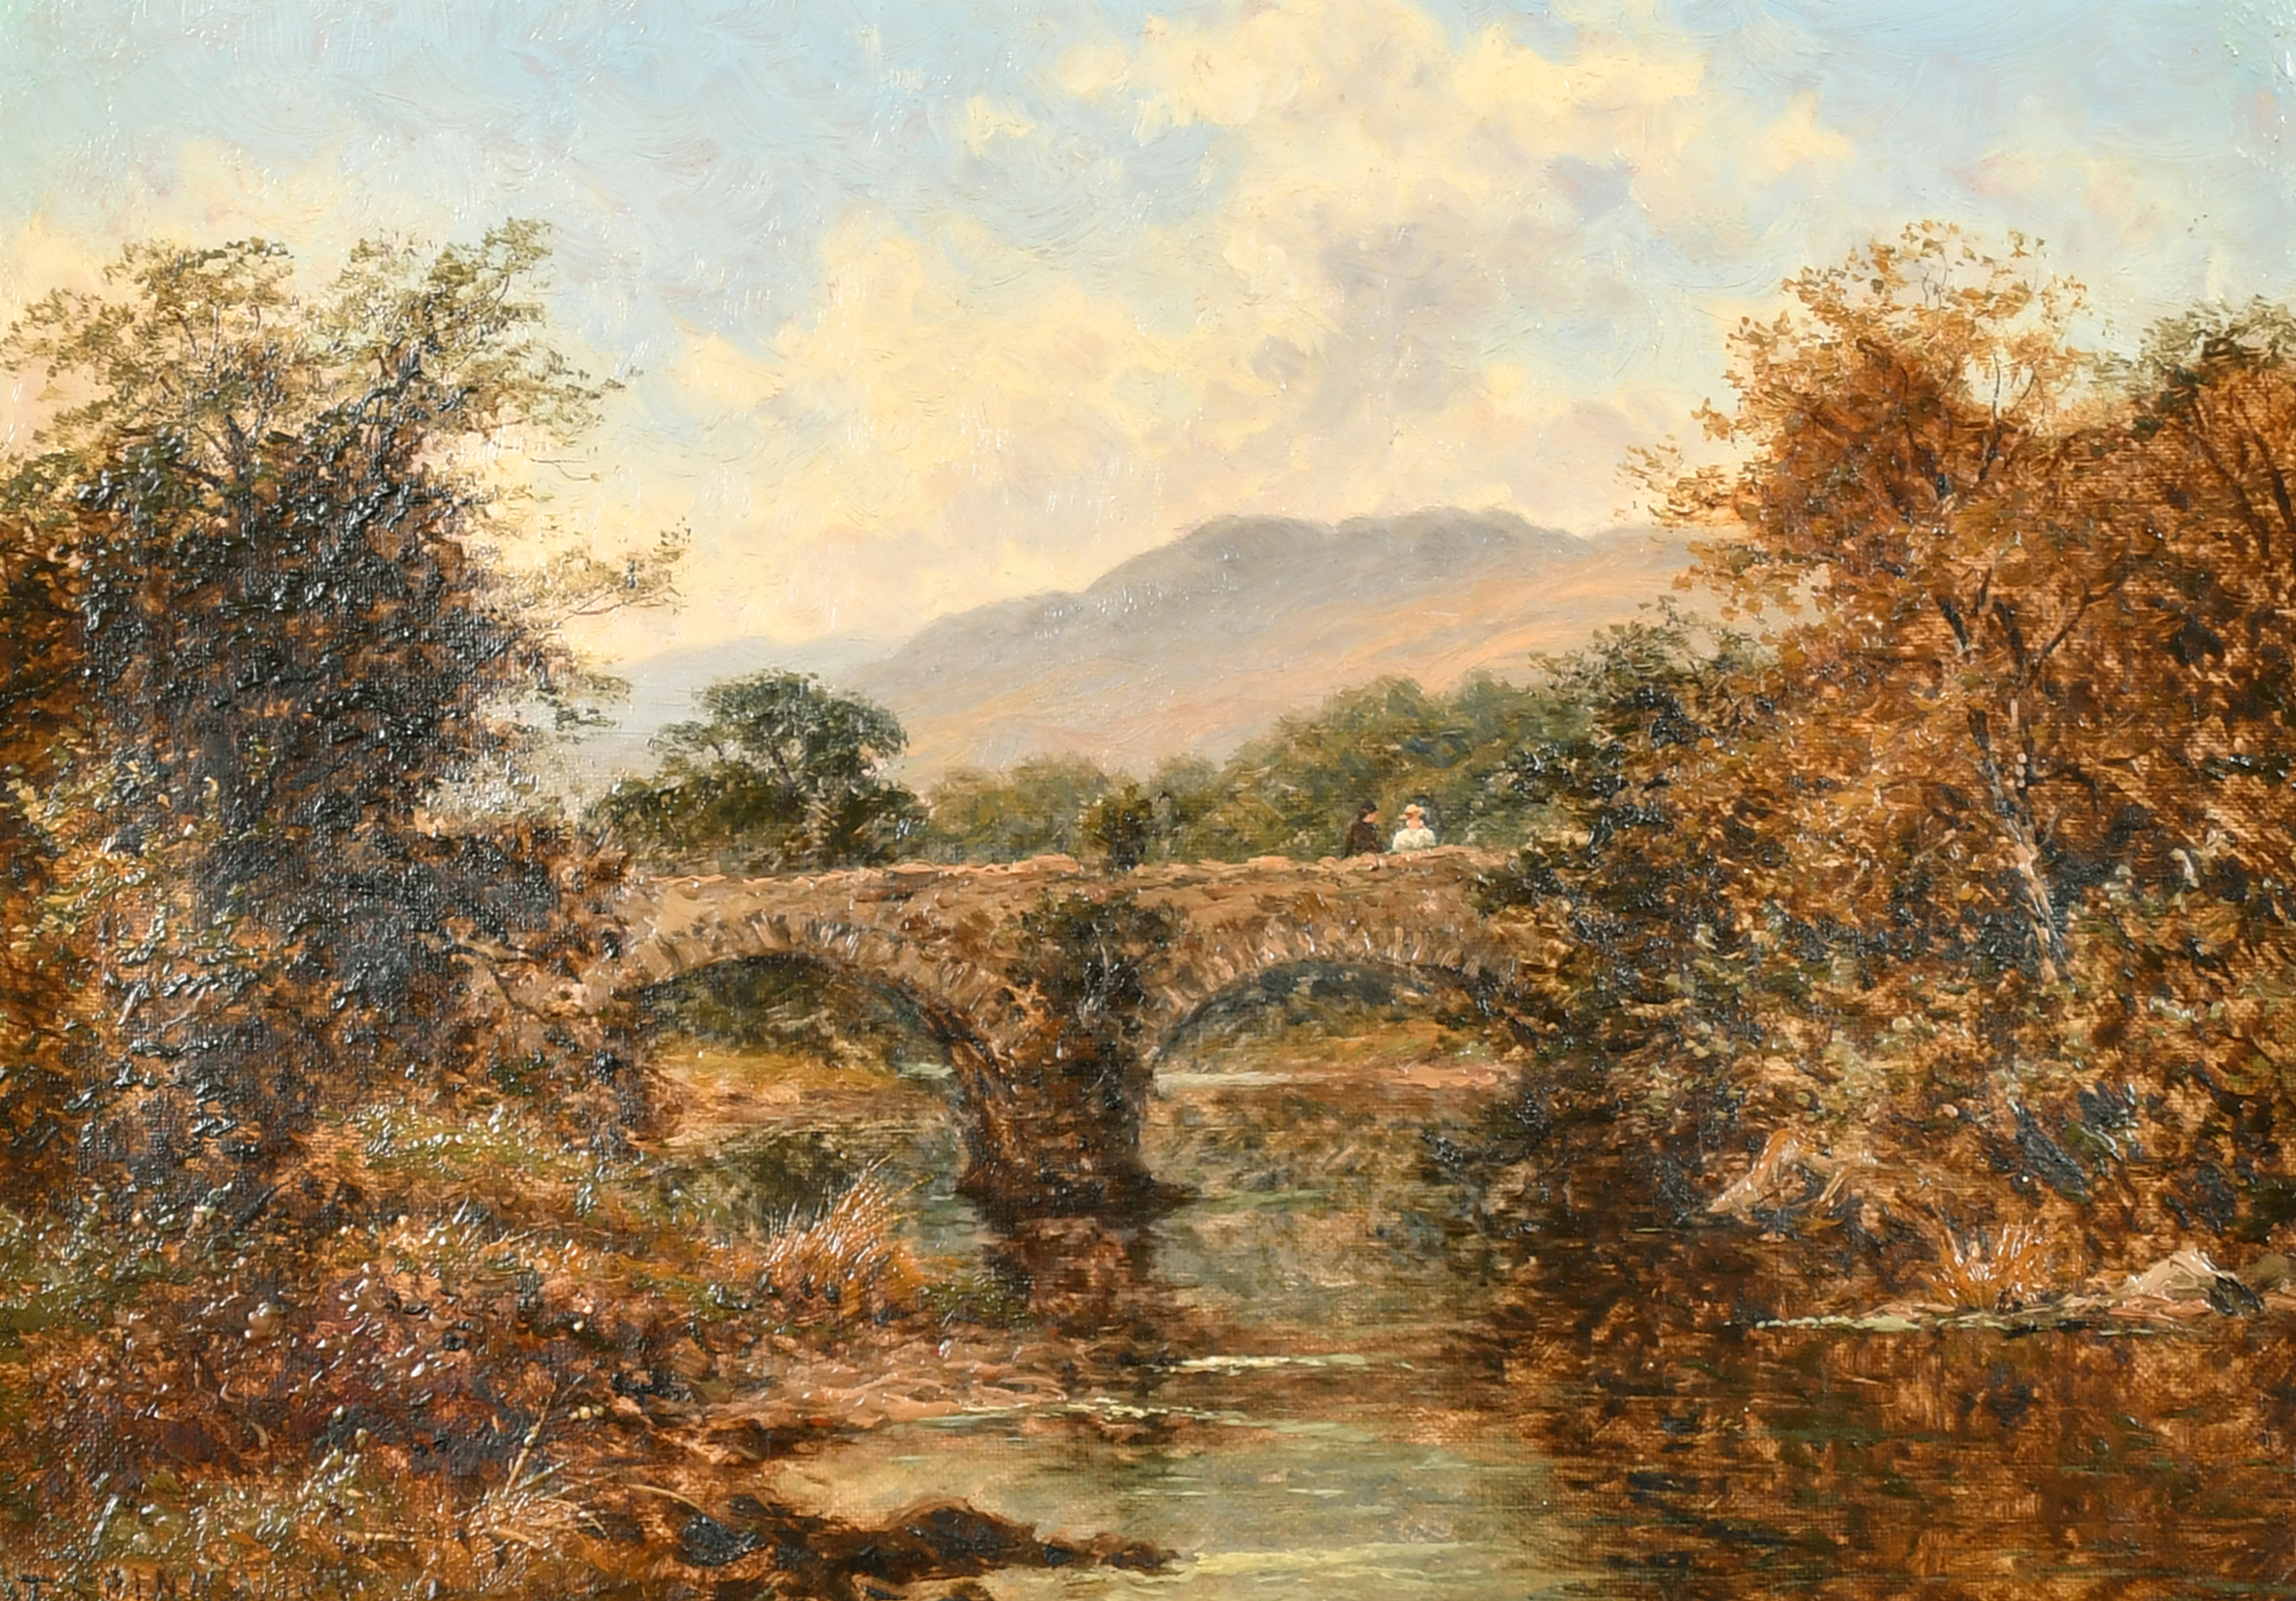 Thomas Spinks (1847-1927) British. A River Landscape with Figures on a Bridge, Oil on canvas,